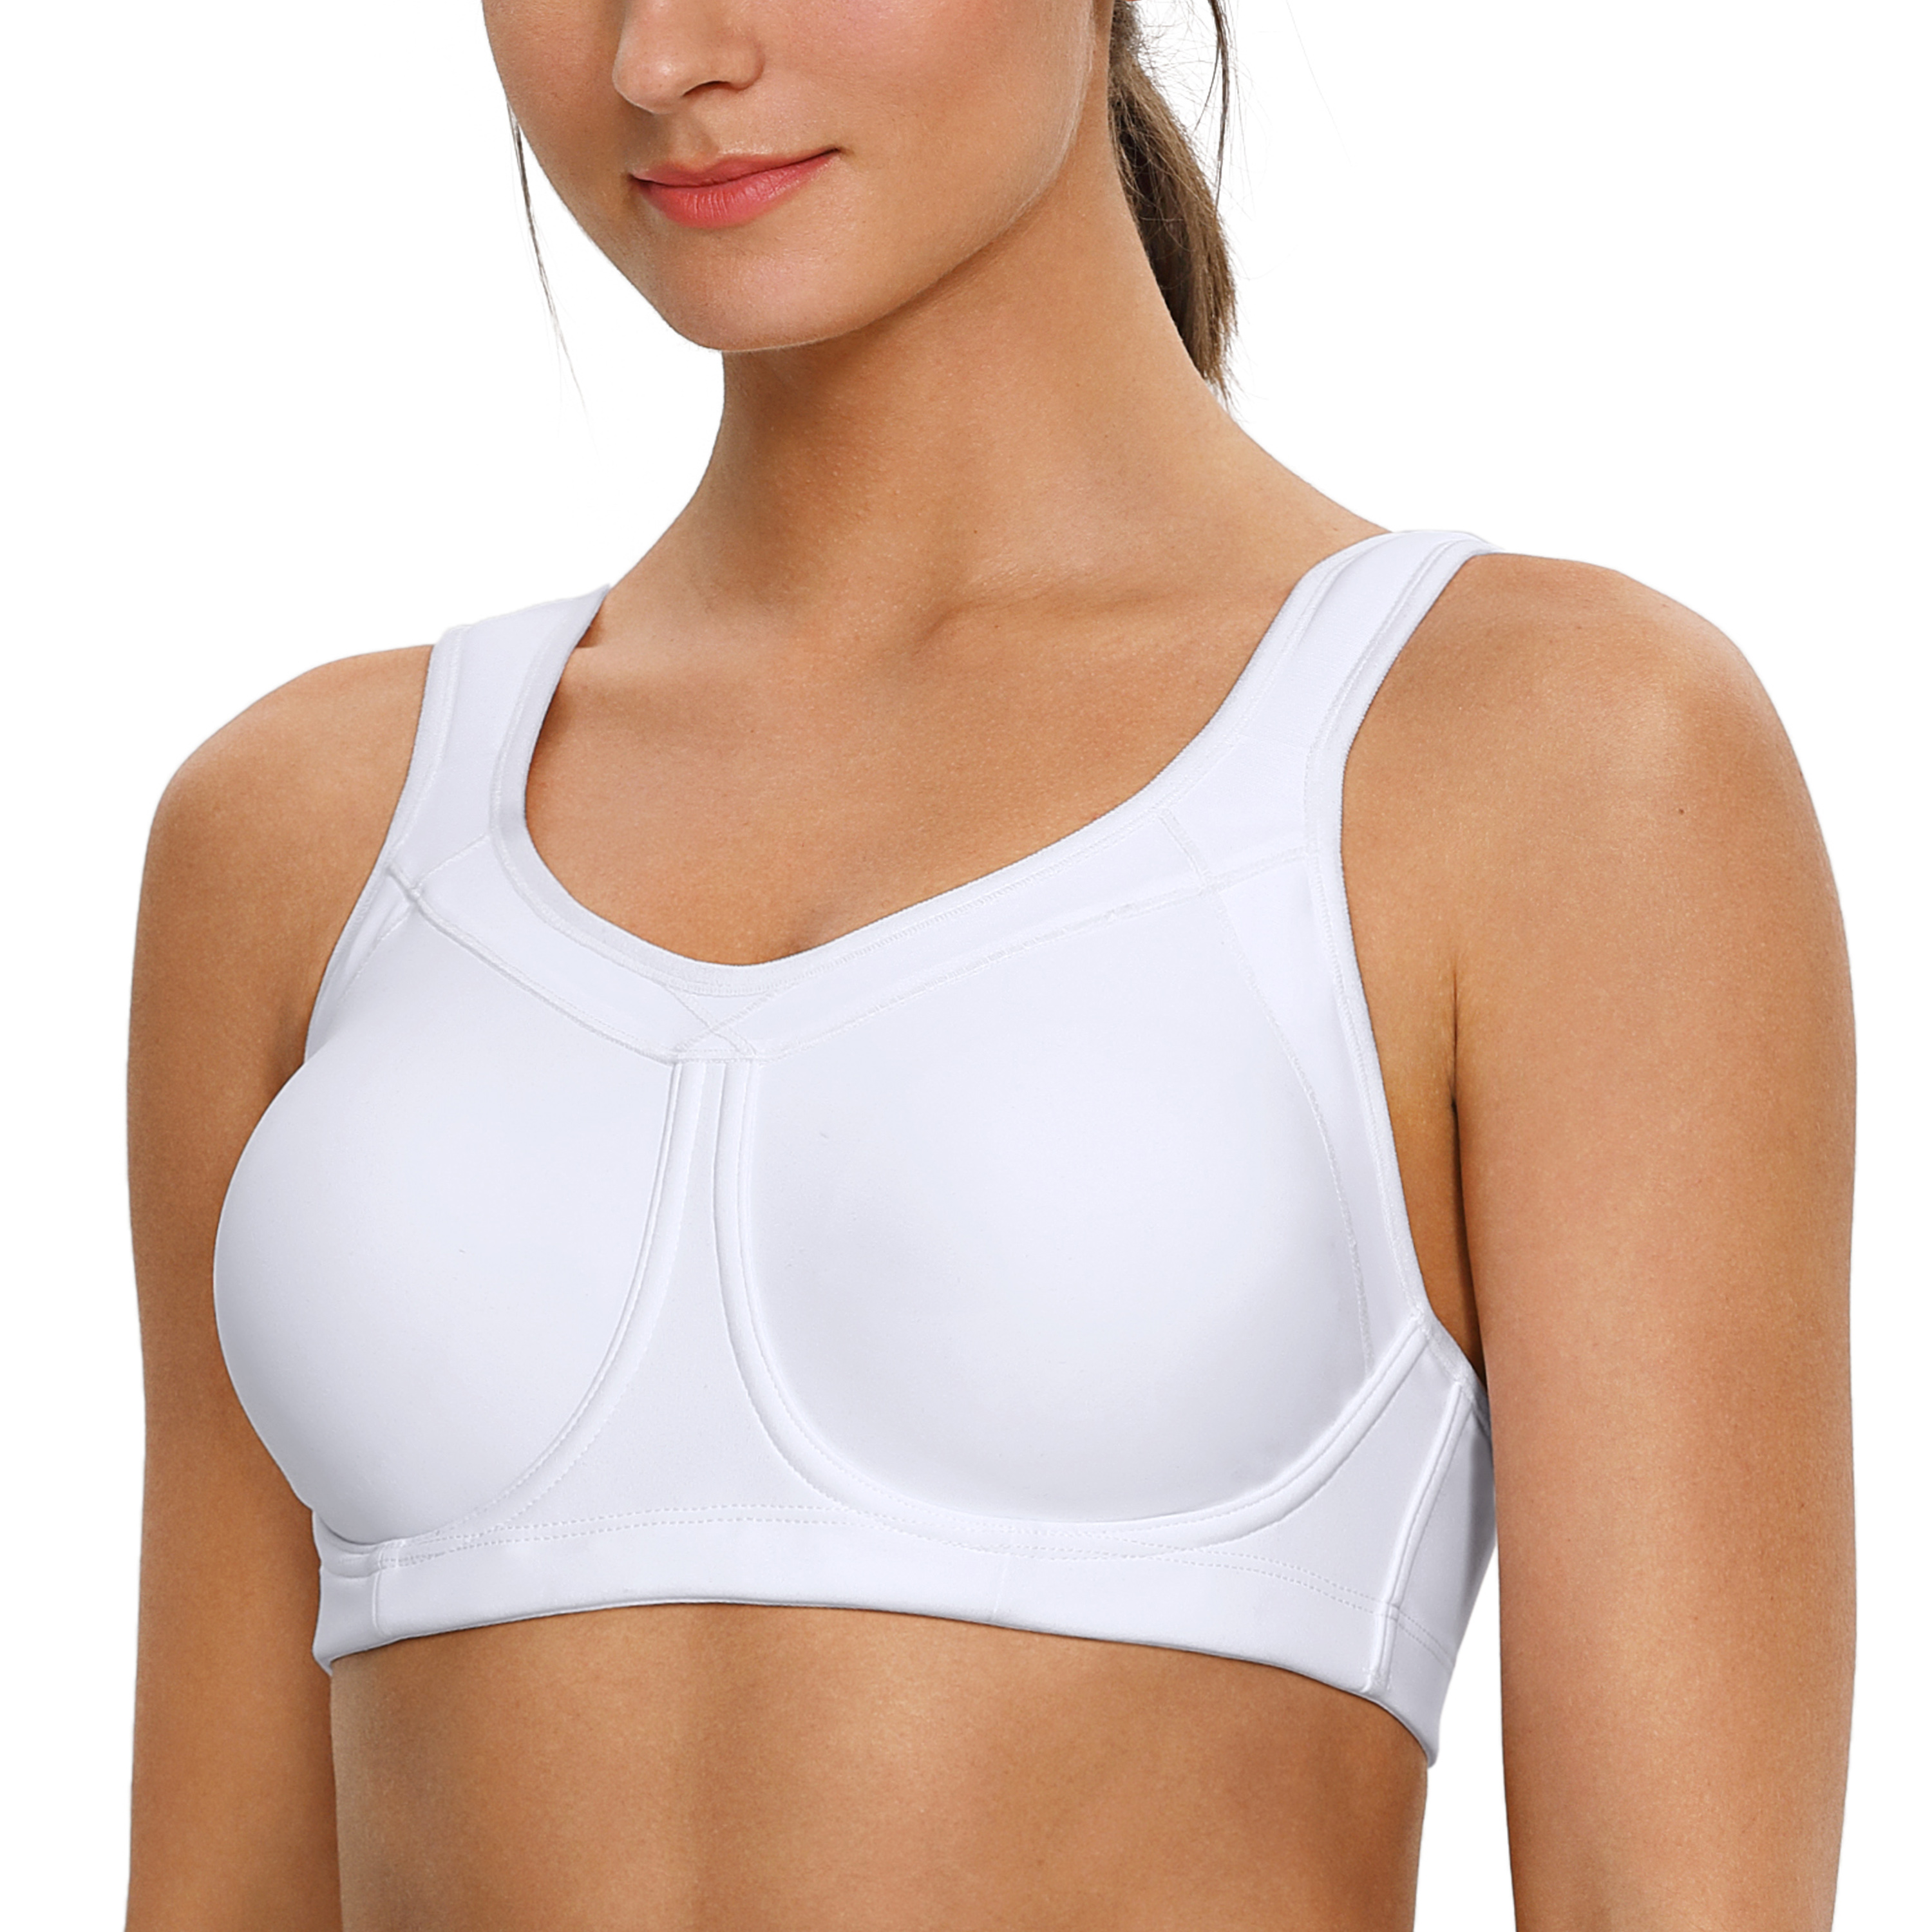 SYROKAN High Impact Sports Bras for Women Support Togo